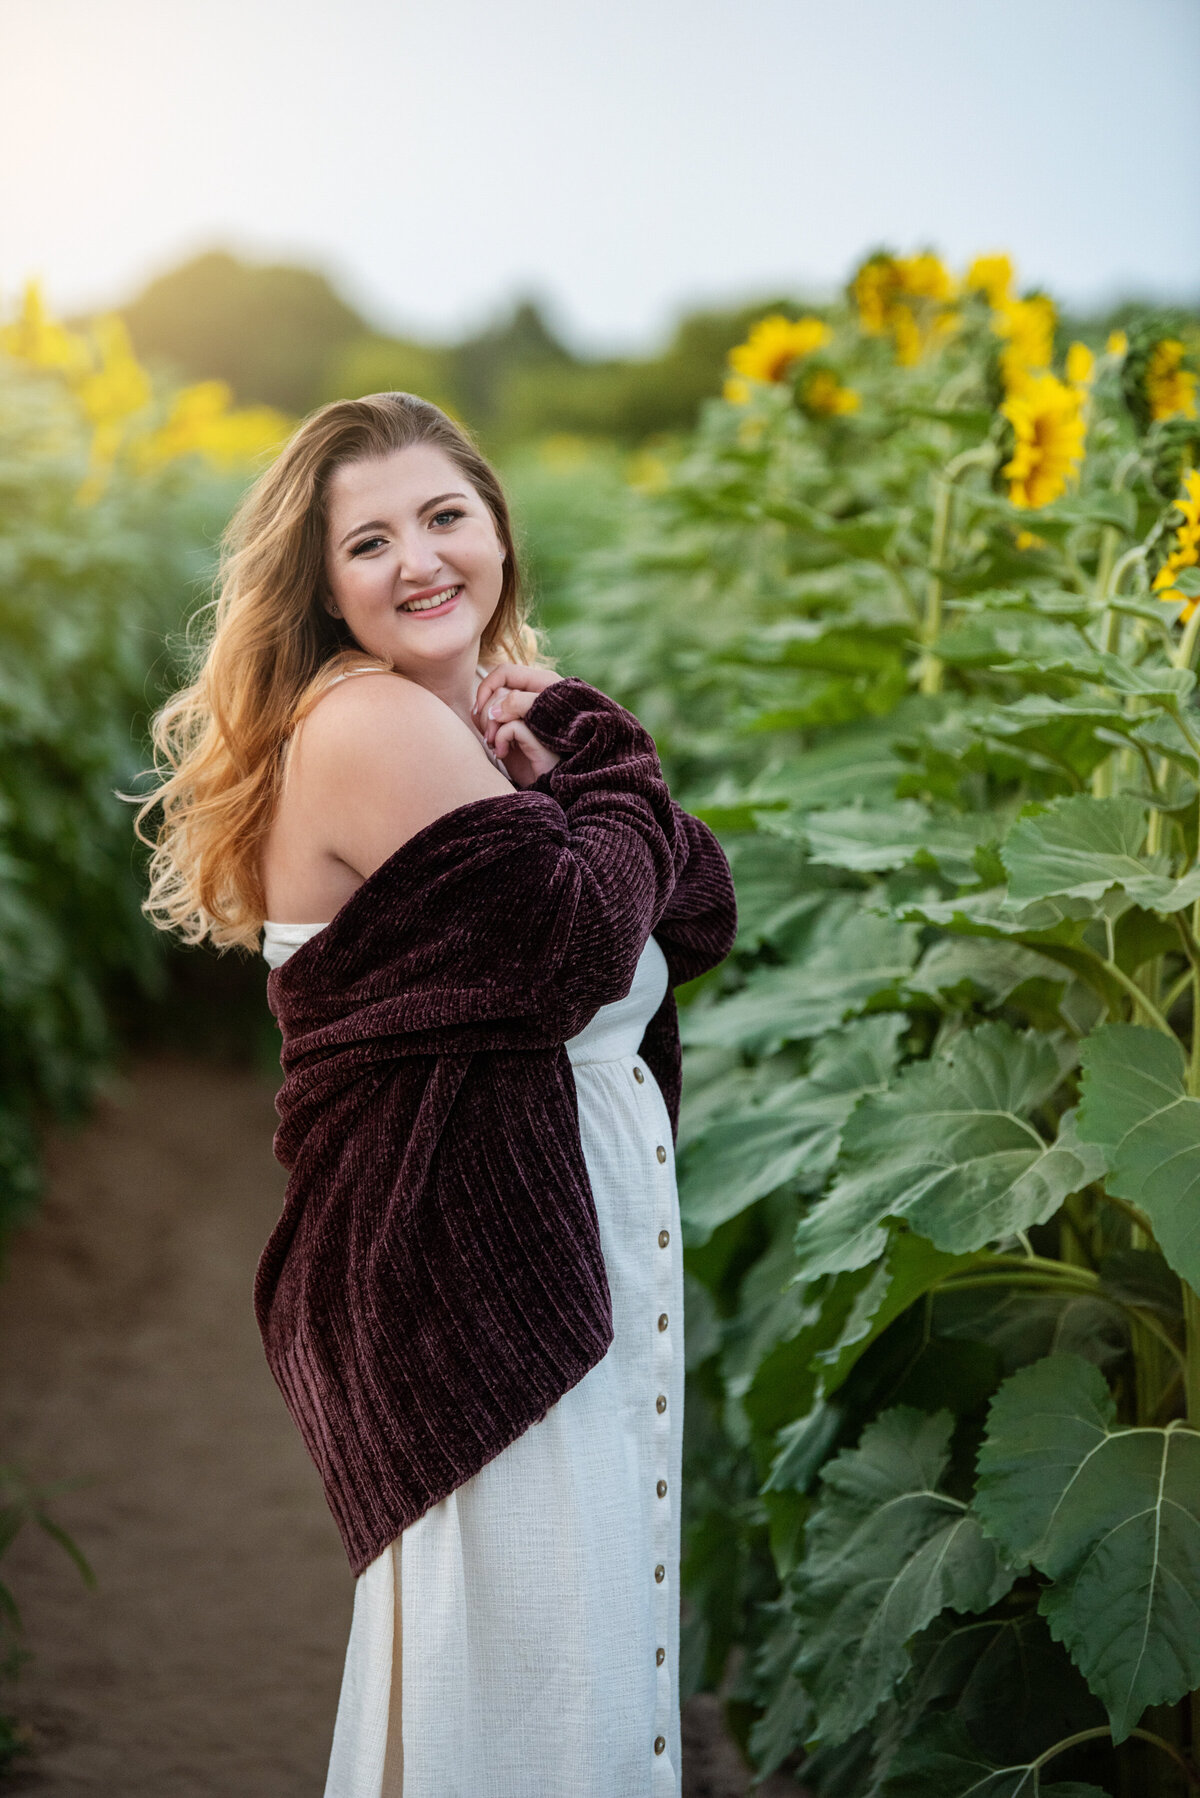 girl wearing white dress and maroon cardigan in row of sunflowers